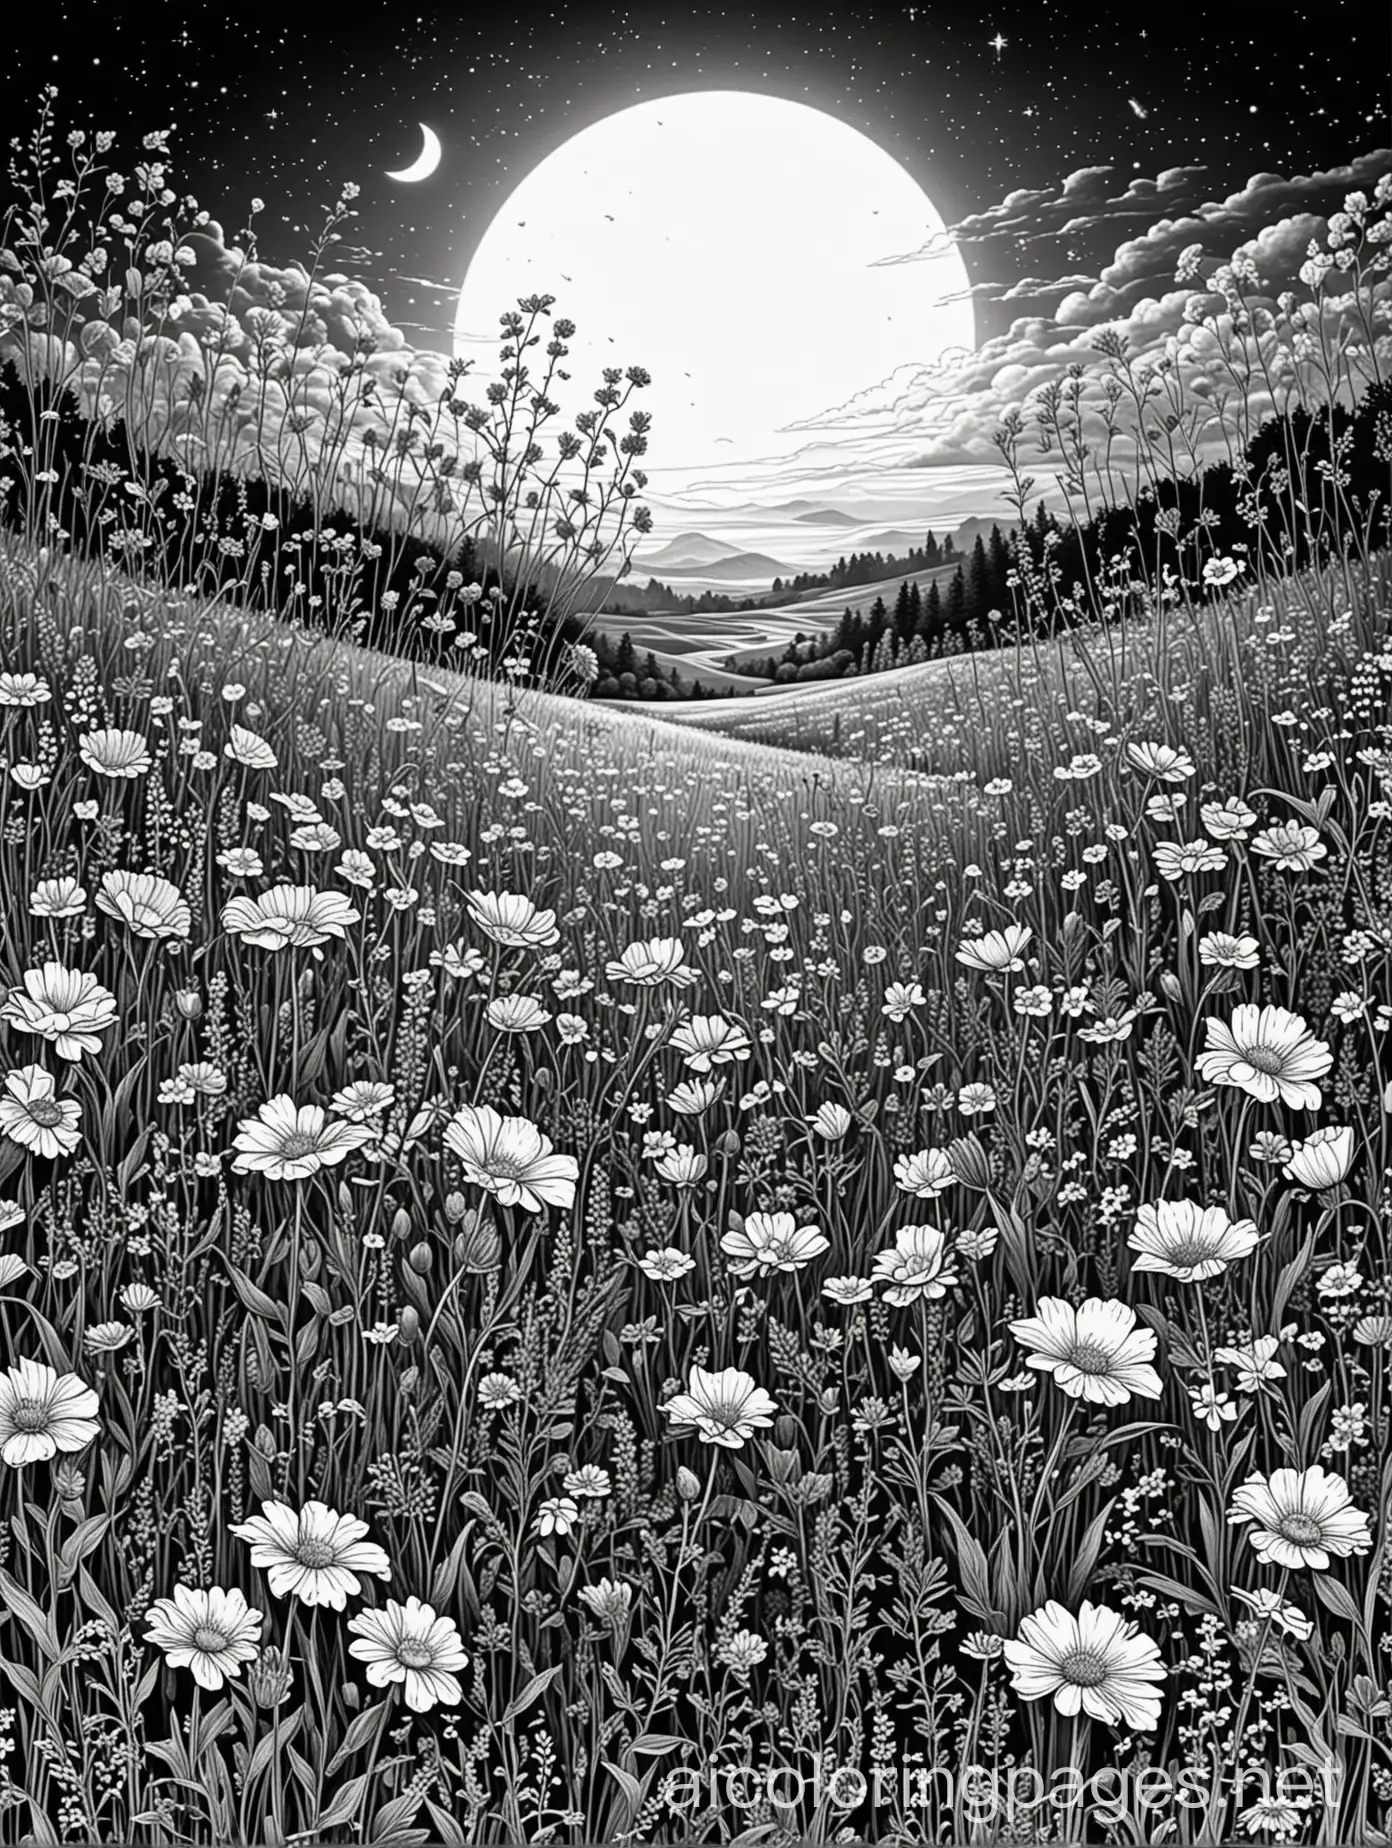 a beautiful field of wildflowers in the moonlight with some extreme closeup in the foreground, Coloring Page, black and white, line art, white background, Simplicity, Ample White Space. The background of the coloring page is plain white to make it easy for young children to color within the lines. The outlines of all the subjects are easy to distinguish, making it simple for kids to color without too much difficulty